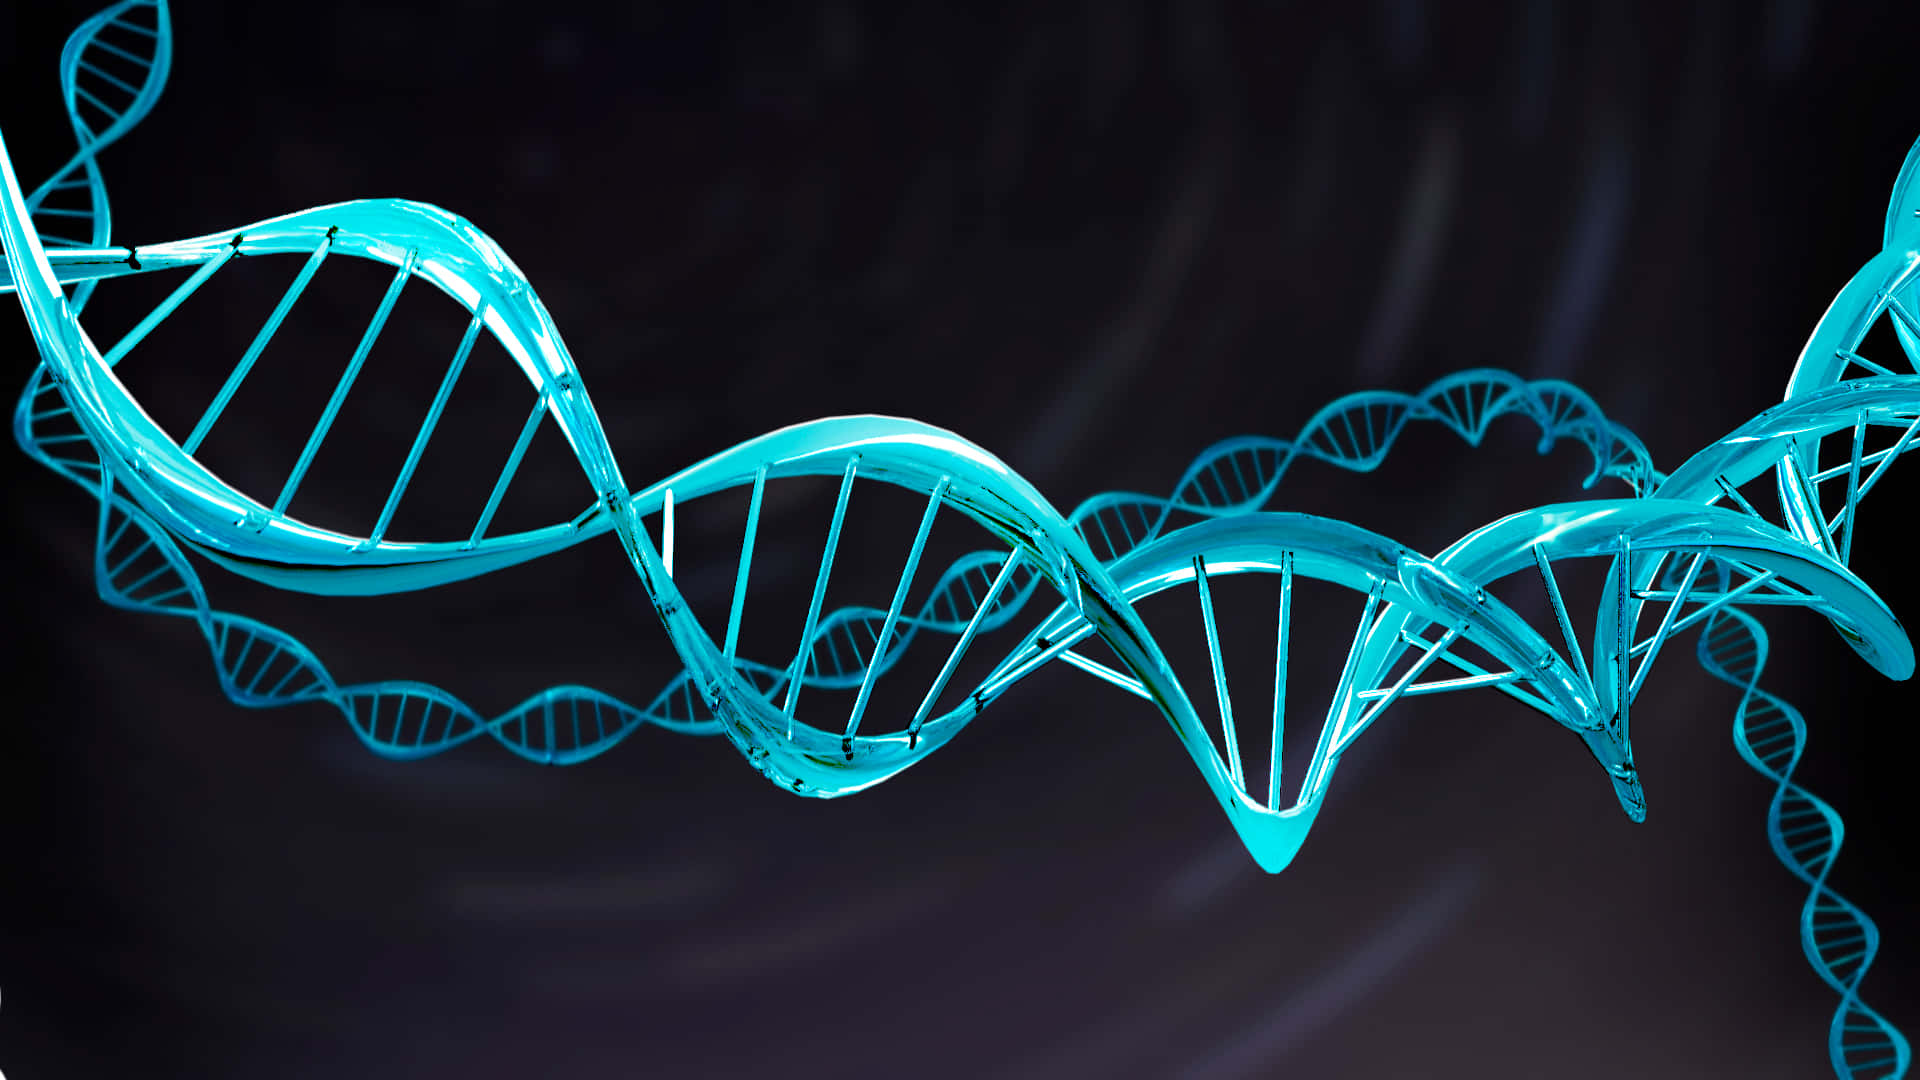 A Blue Dna Strand With A Black Background